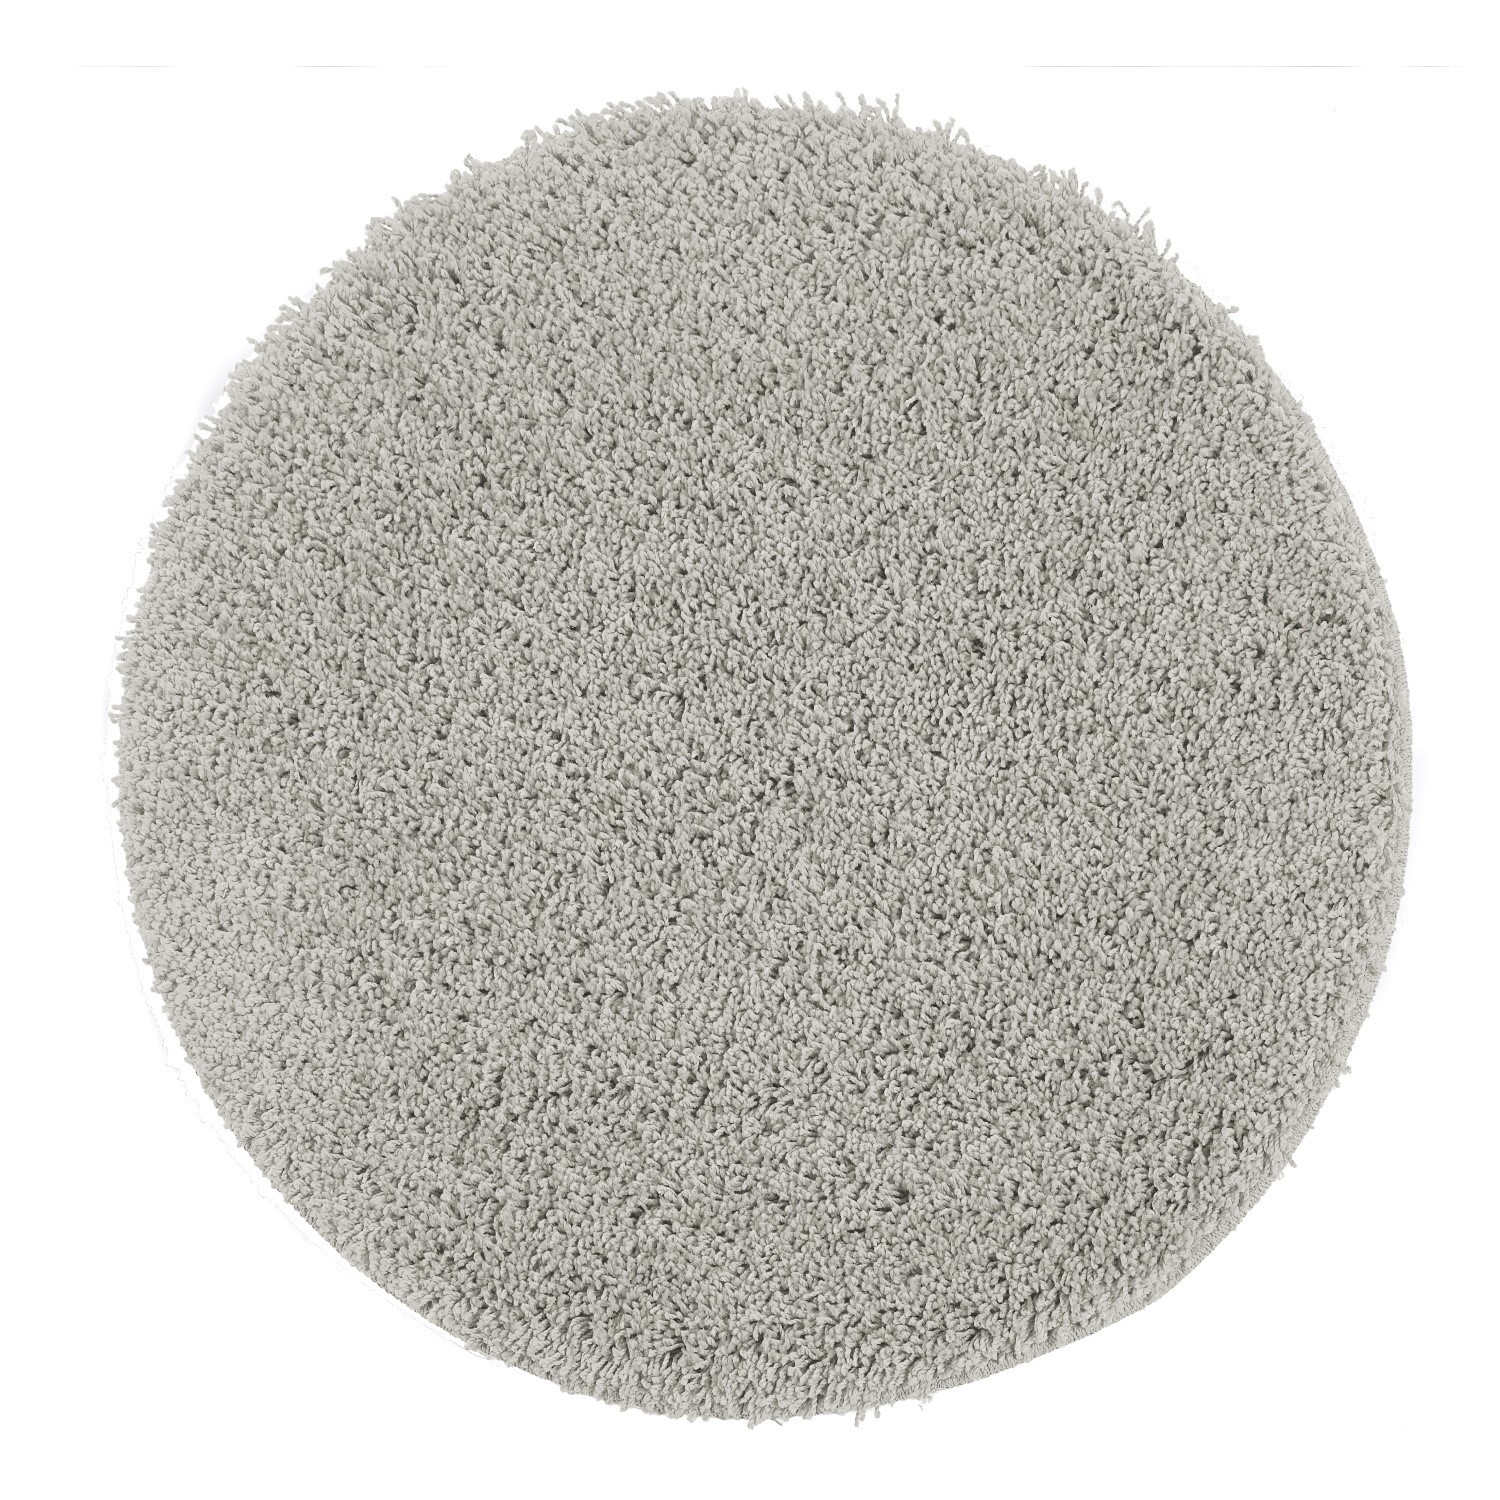 Photo of Ripley shaggy stain resistant round silver grey rug - 100x100cm